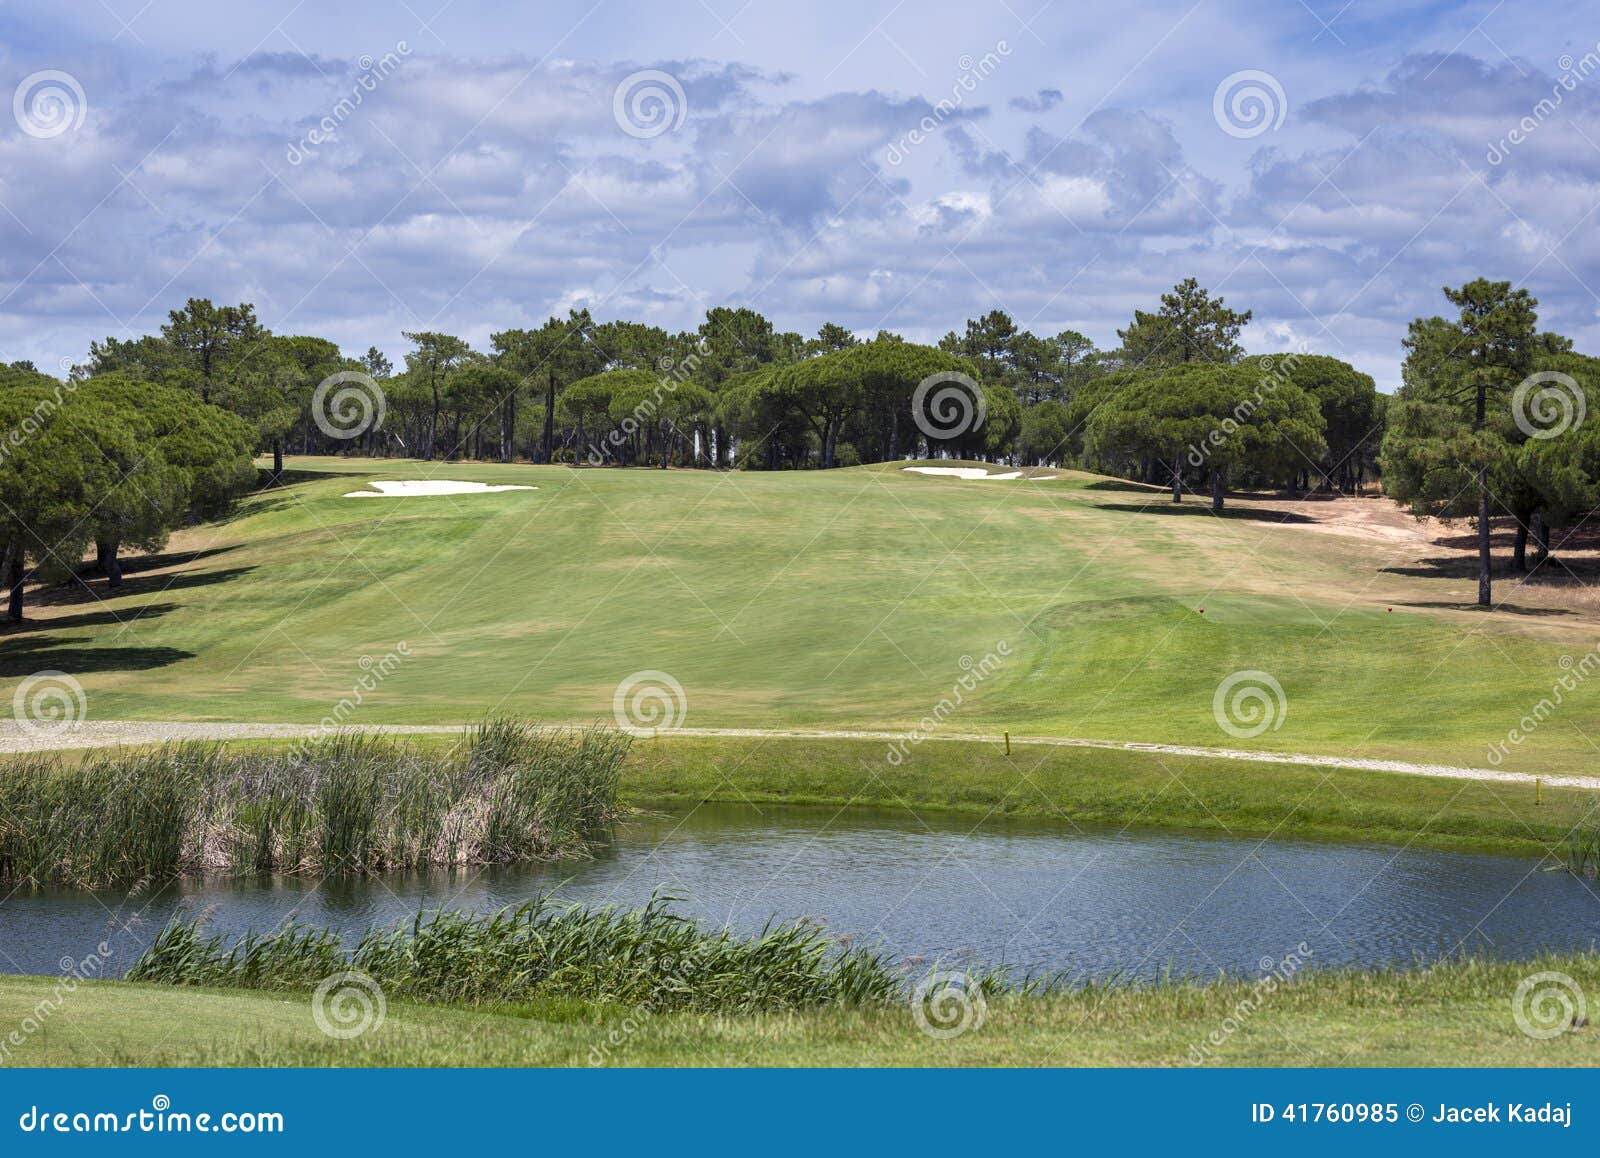 golf course on vilamoura, portugal